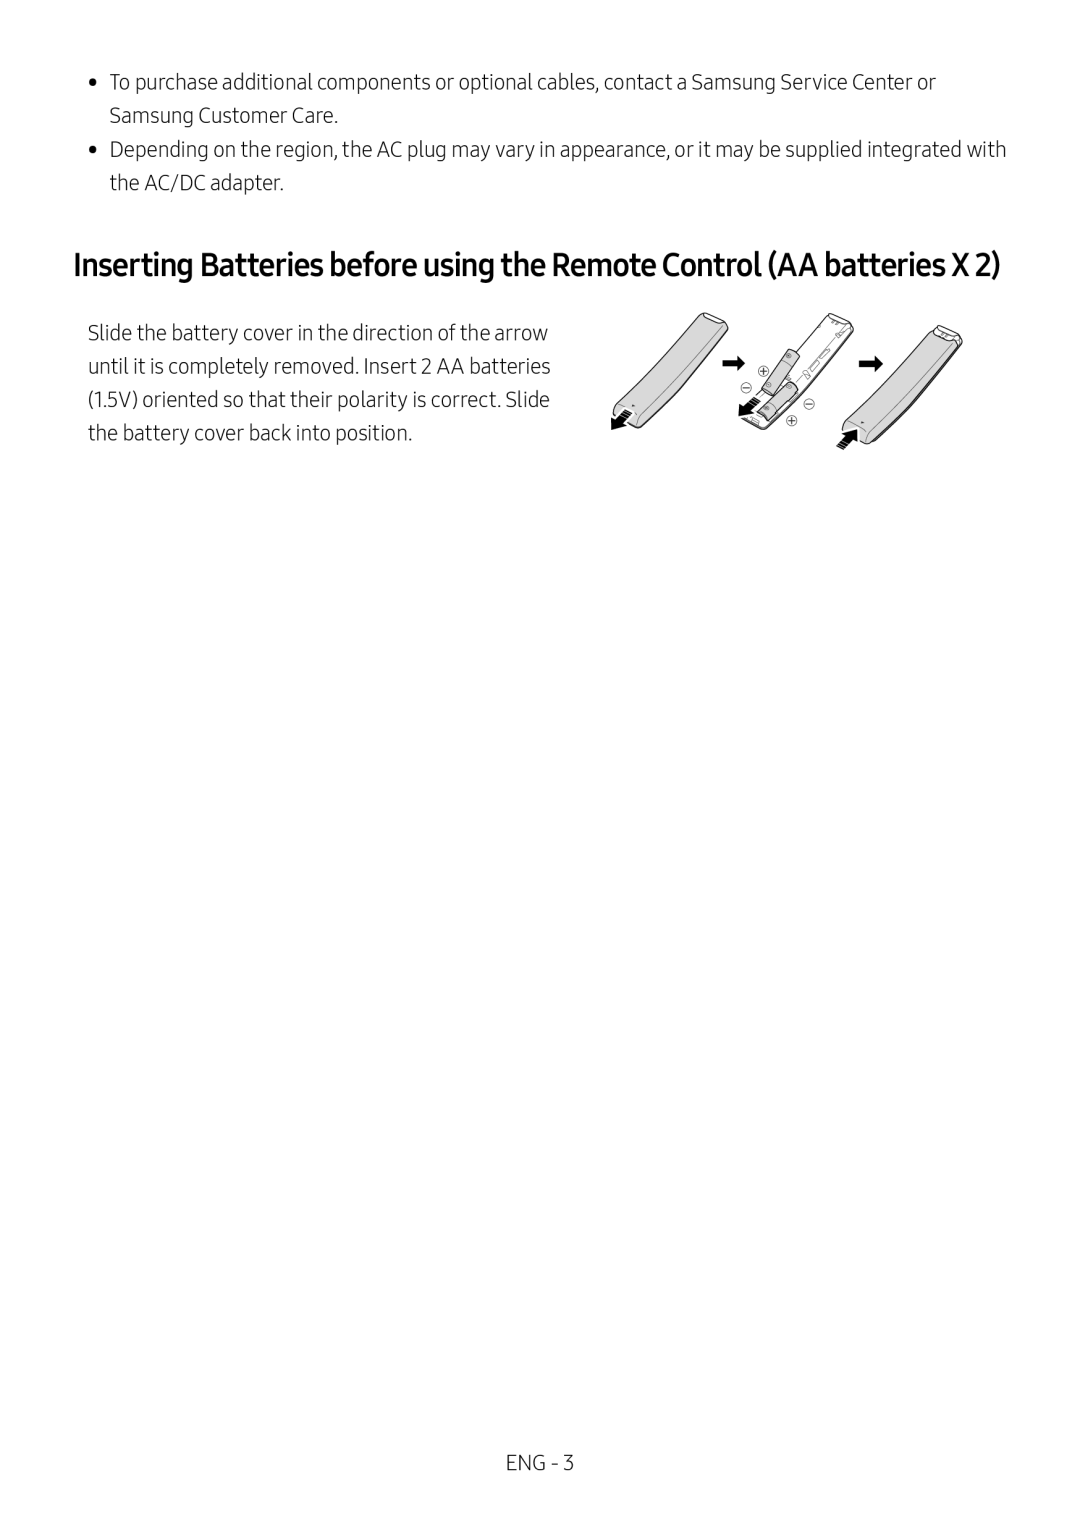 Inserting Batteries before using the Remote Control (AA batteries X 2) Standard HW-R47M